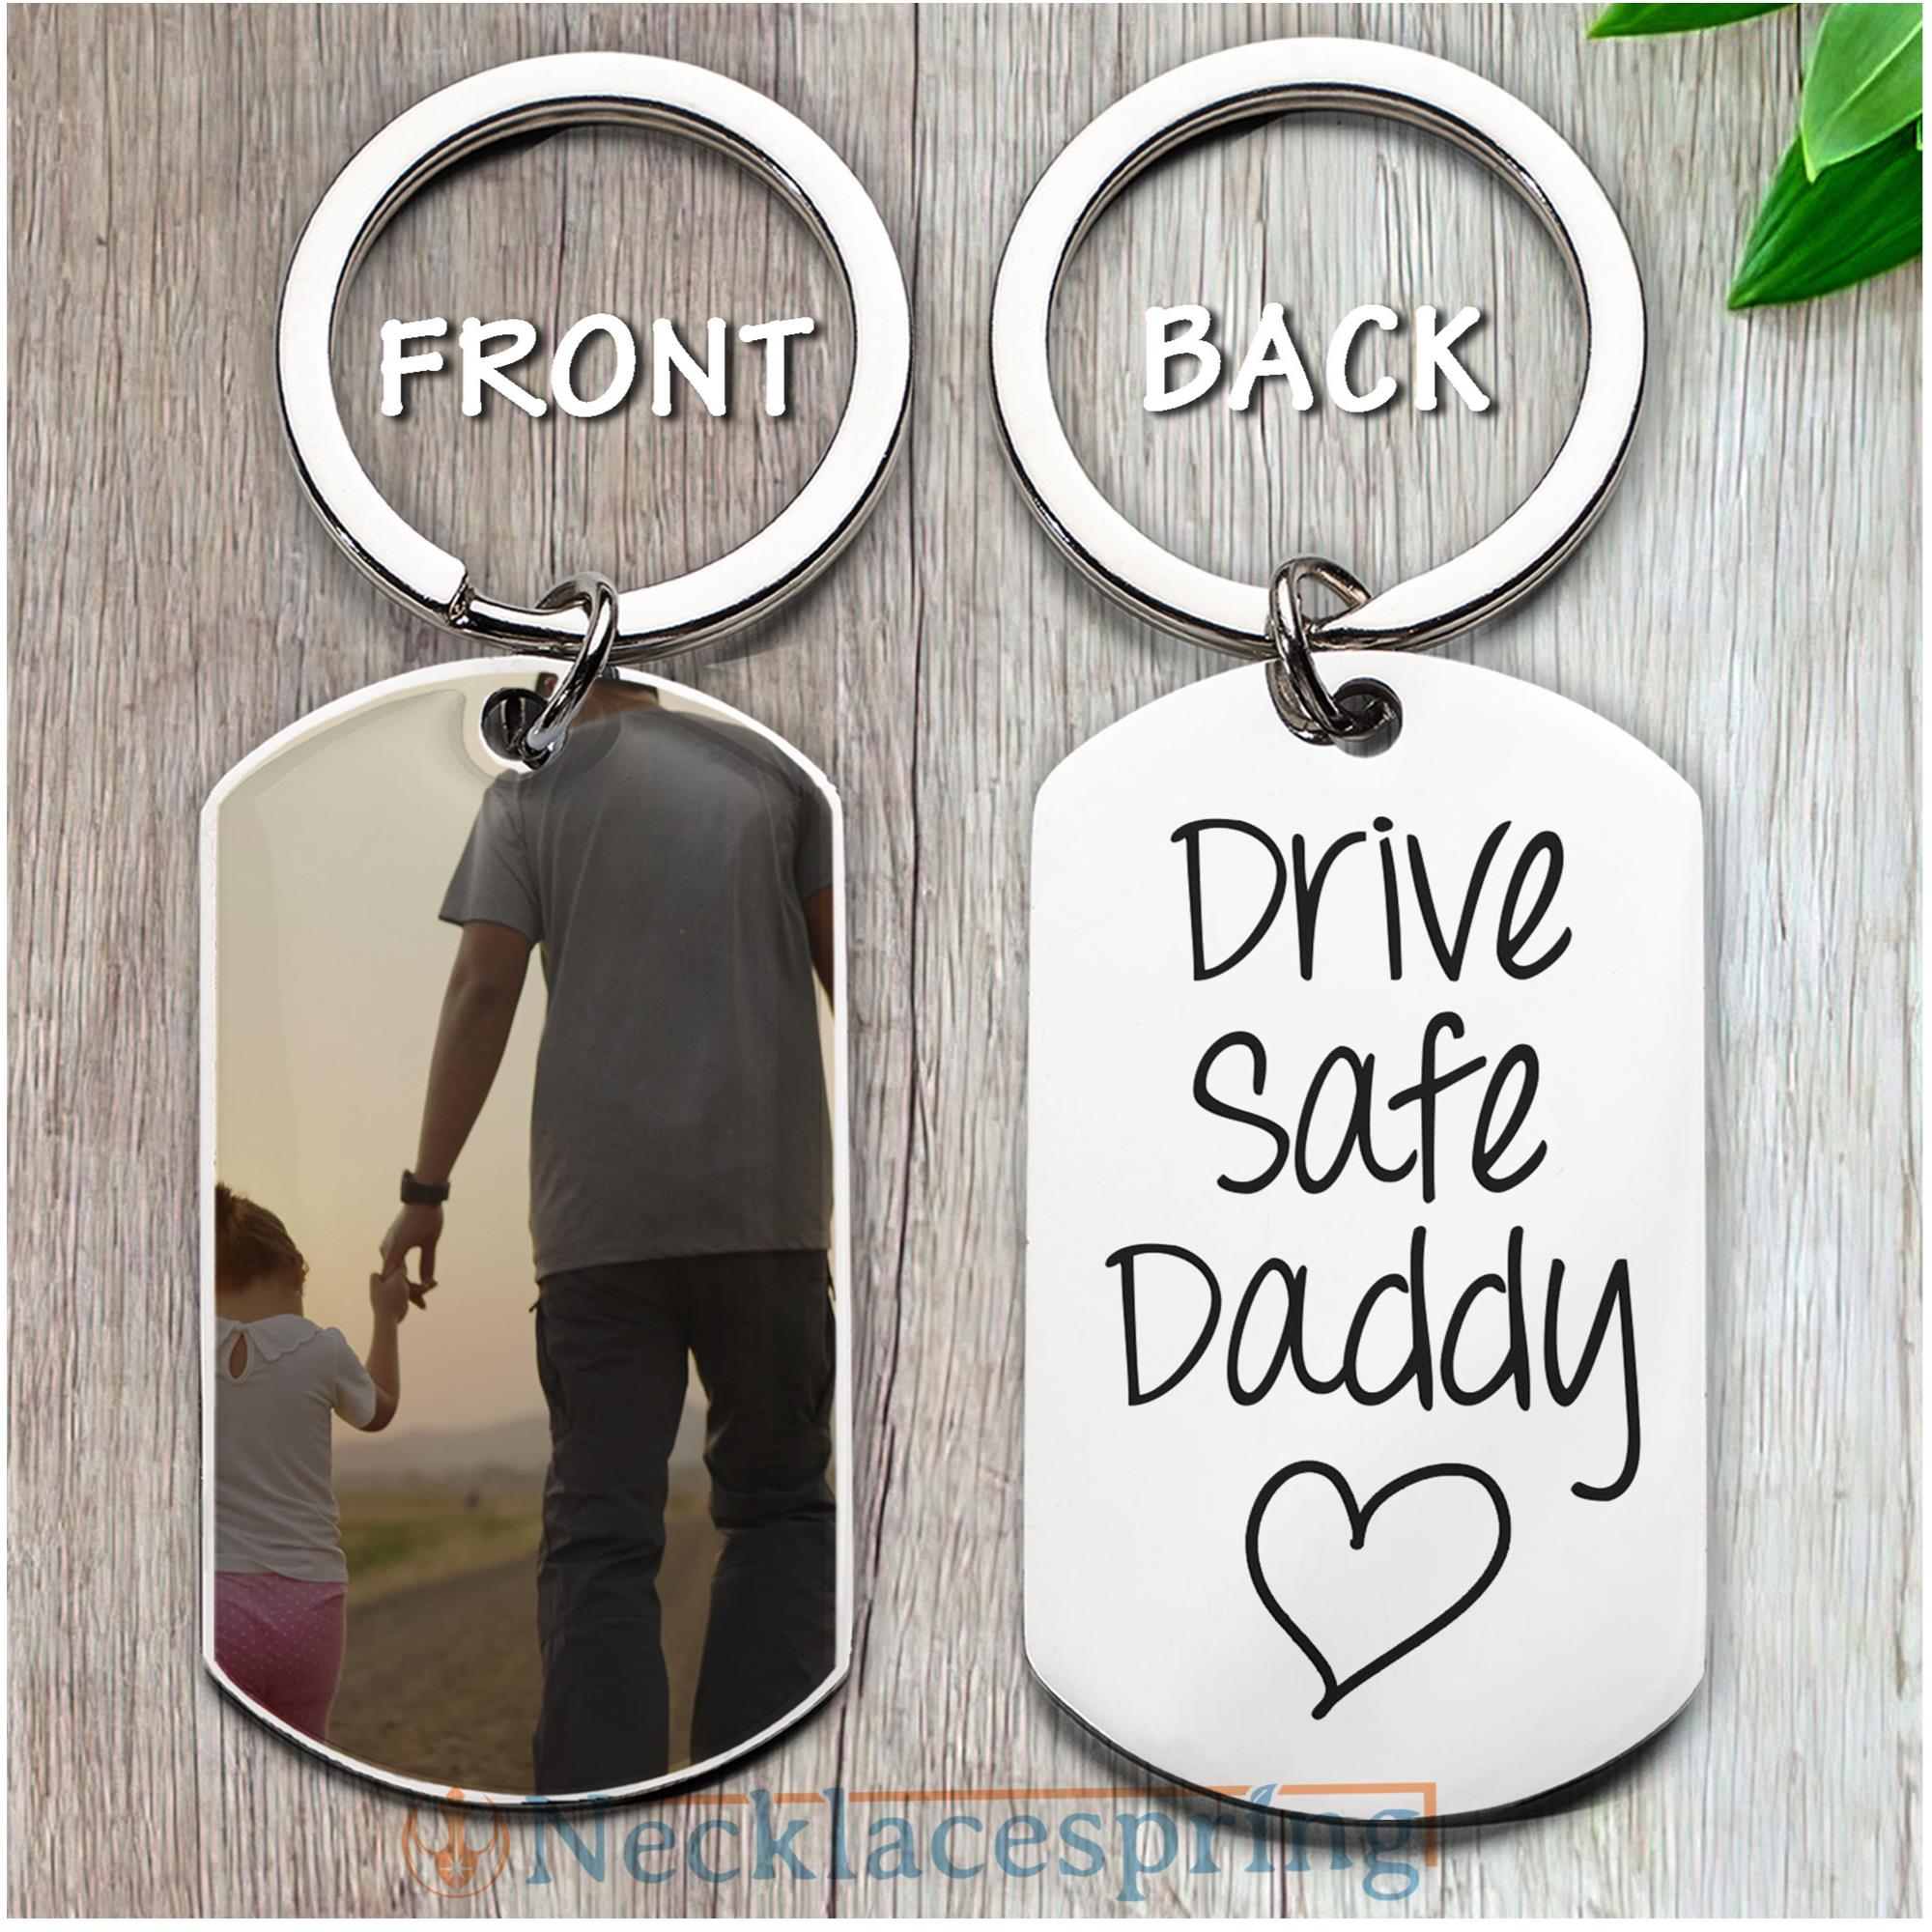 custom-photo-keychain-drive-safe-daddy-picture-keychain-dad-keychain-gift-from-son-personalized-gift-from-kids-fathers-day-metal-keychain-from-daughter-custom-dad-gift-hD-1688177866.jpg